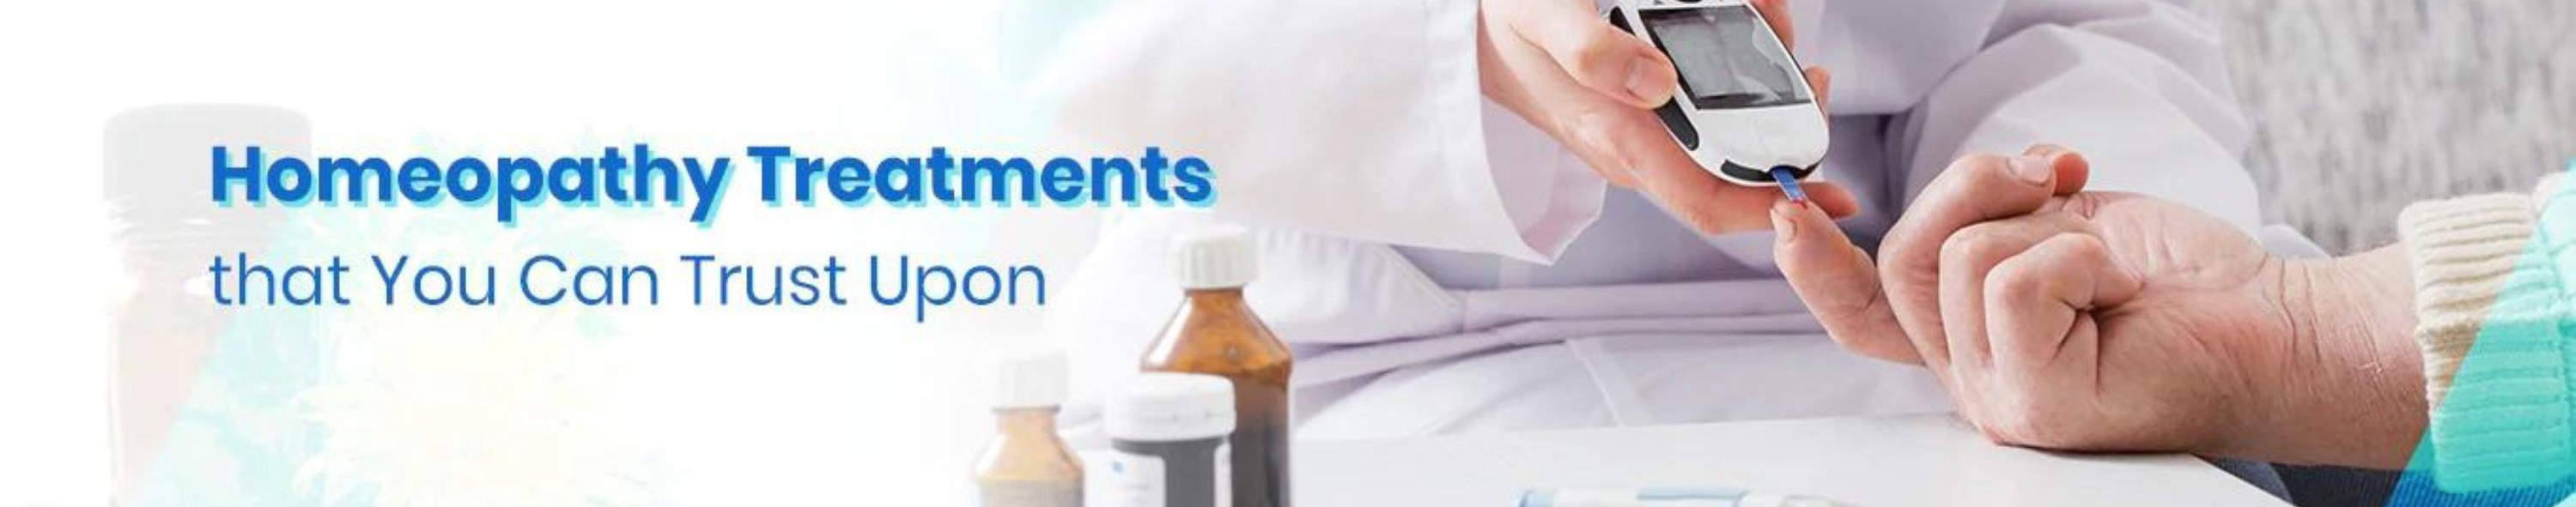 RichCare Homeopathy's profile banner